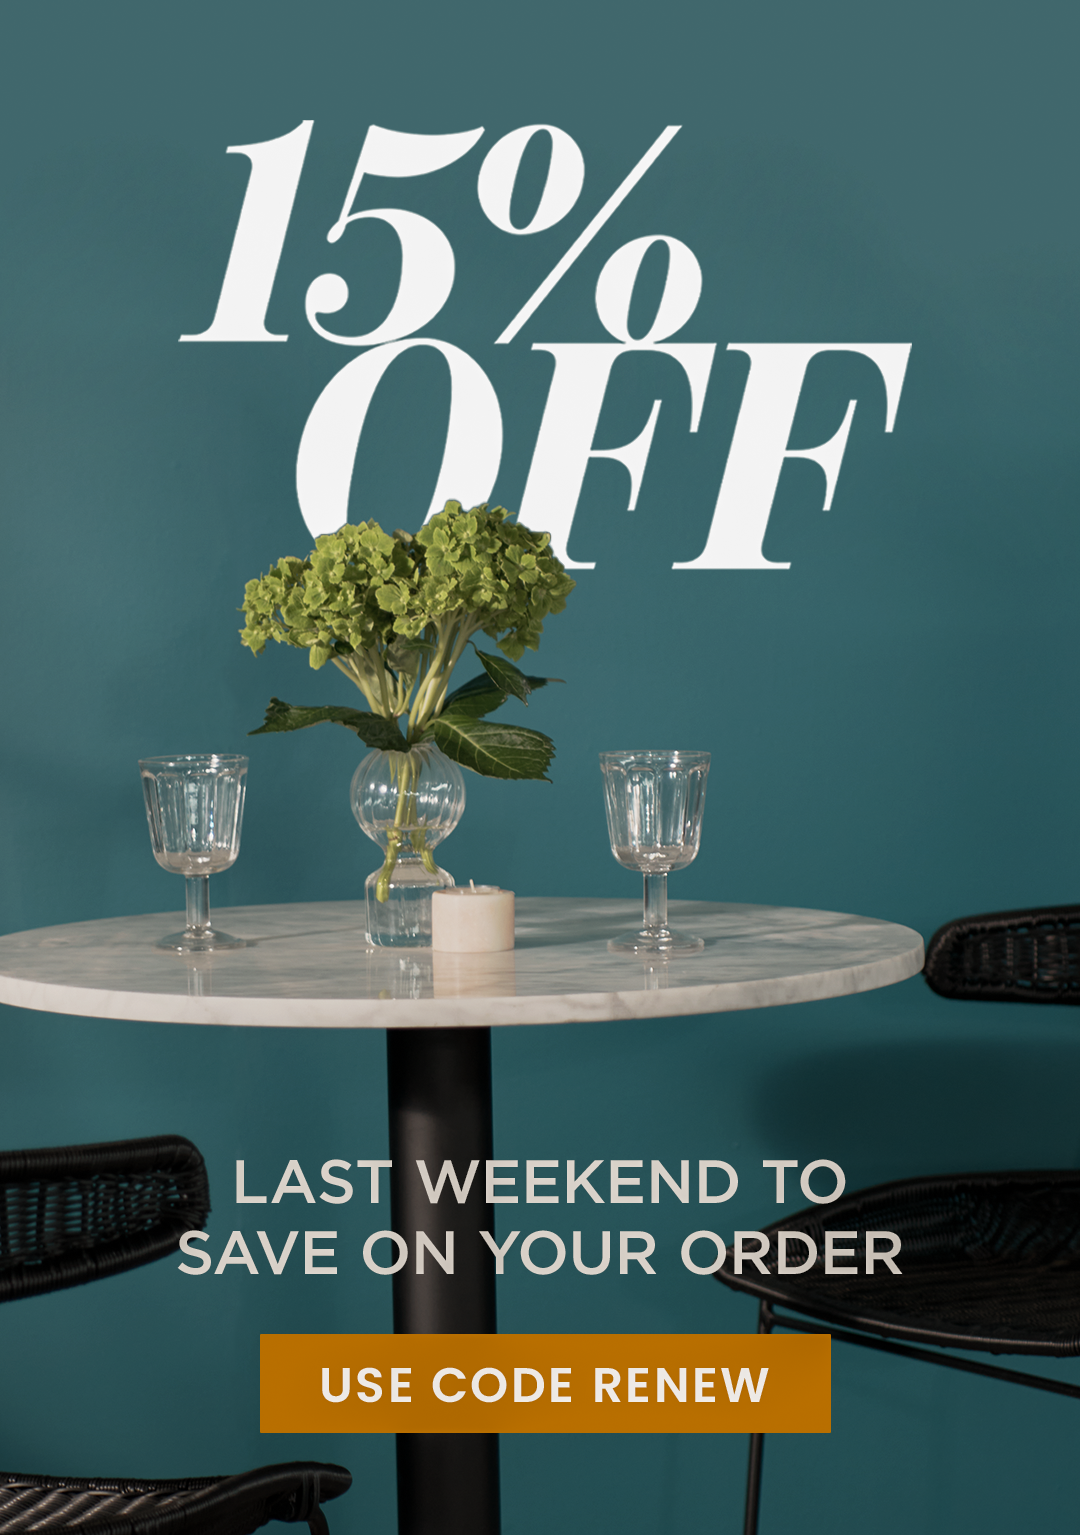 15% OFF YOUR ORDER